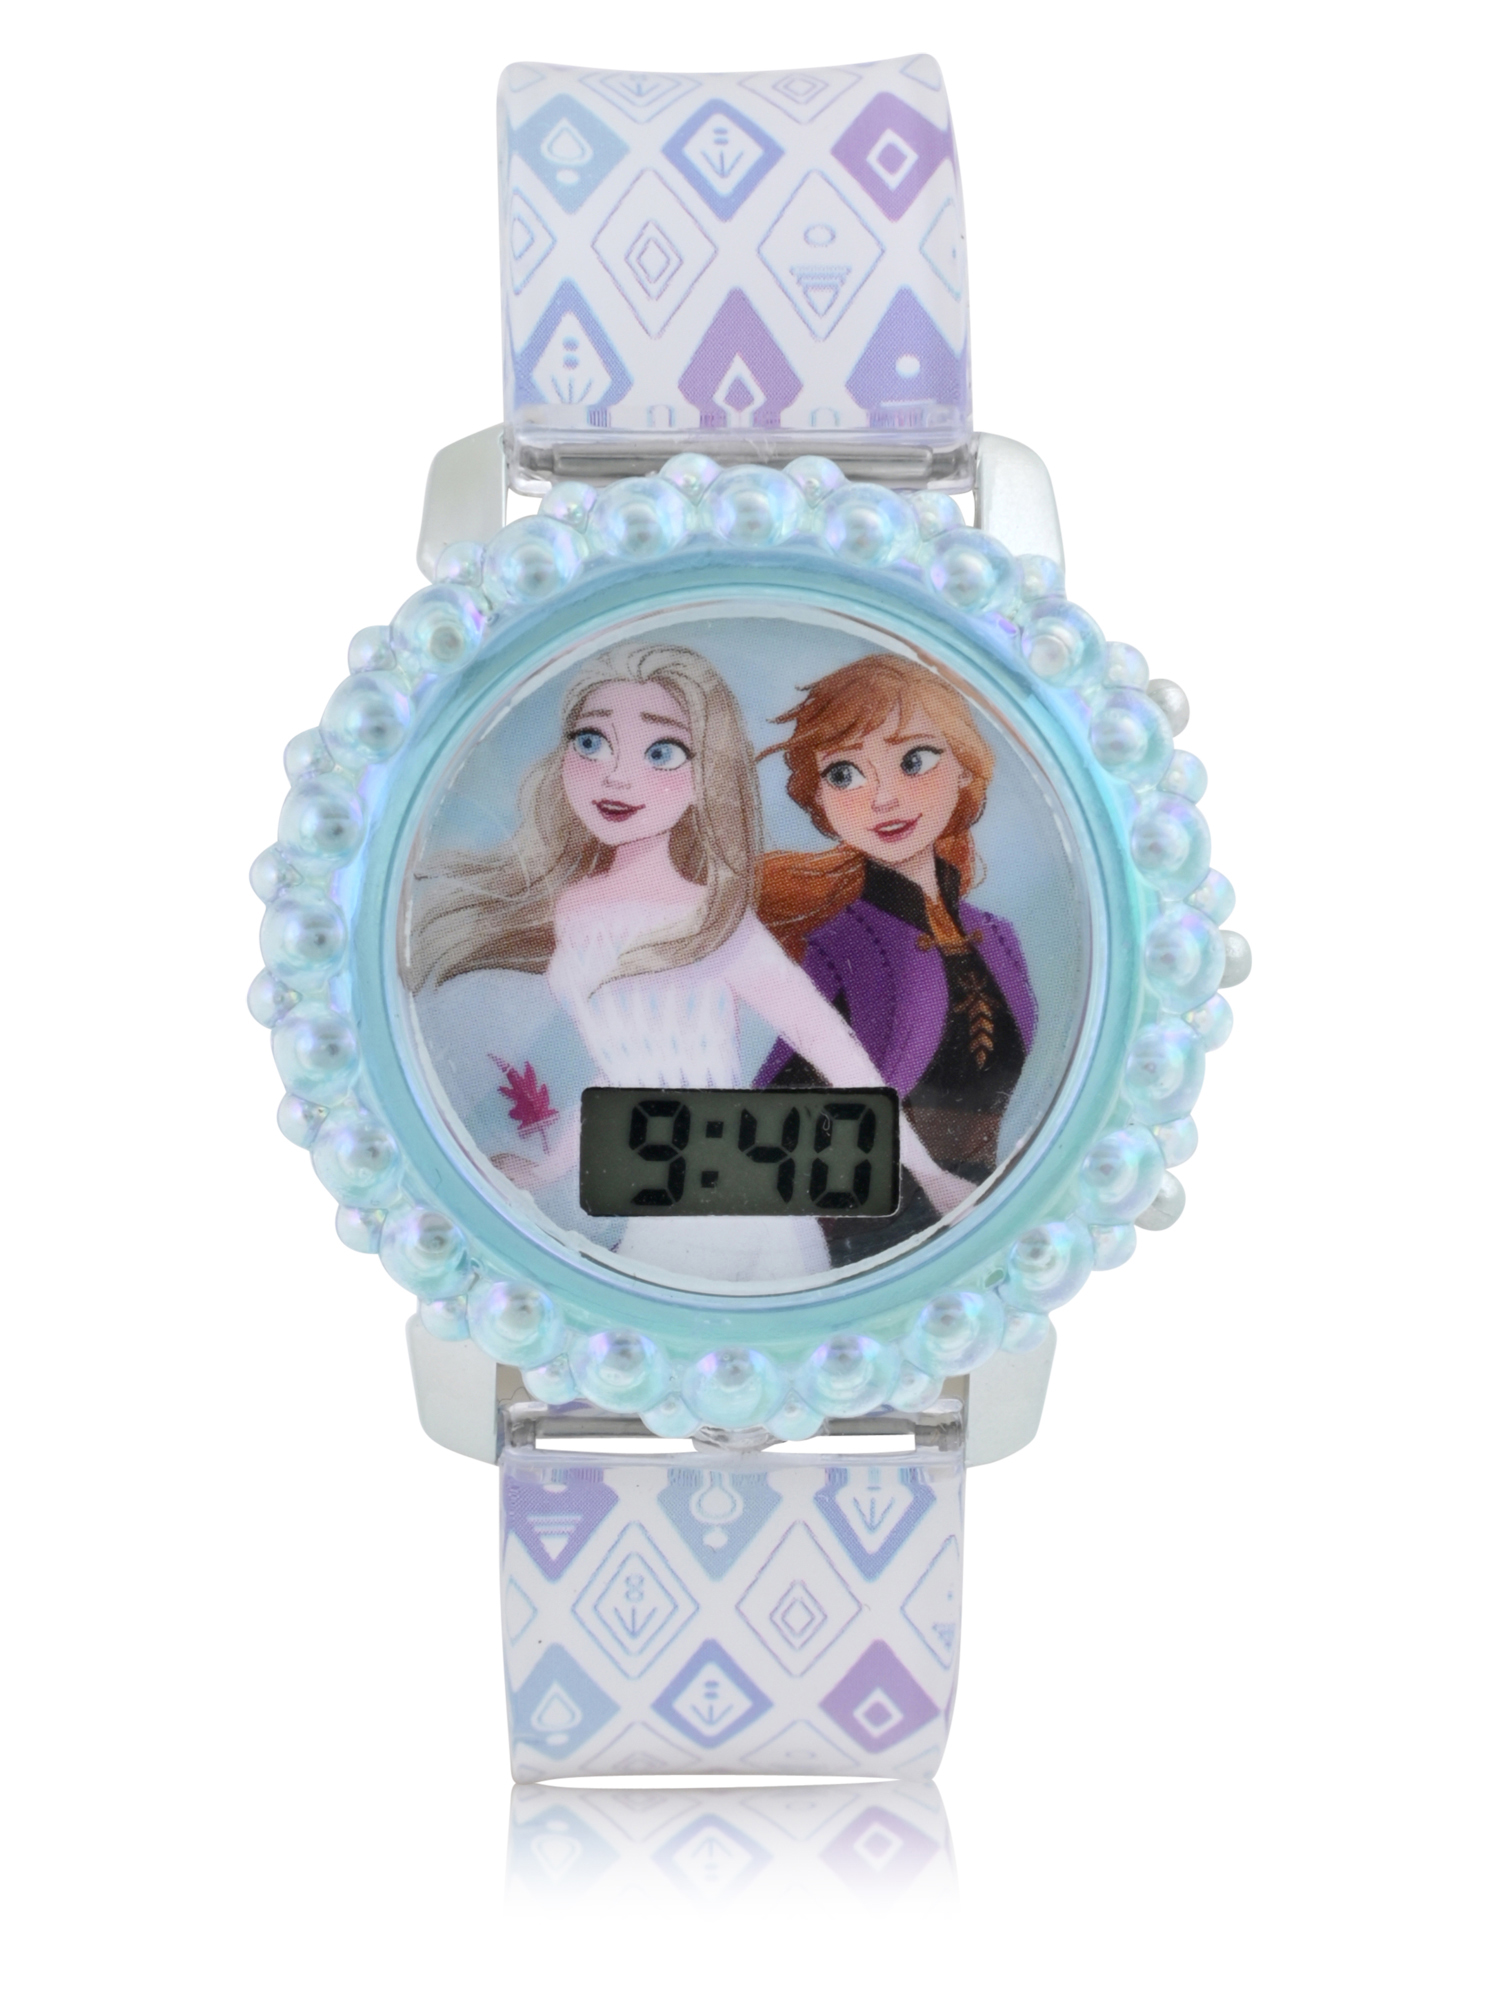 FZN4932WM Frozen Flashing Lights LCD Watch with Printed Strap - image 1 of 4